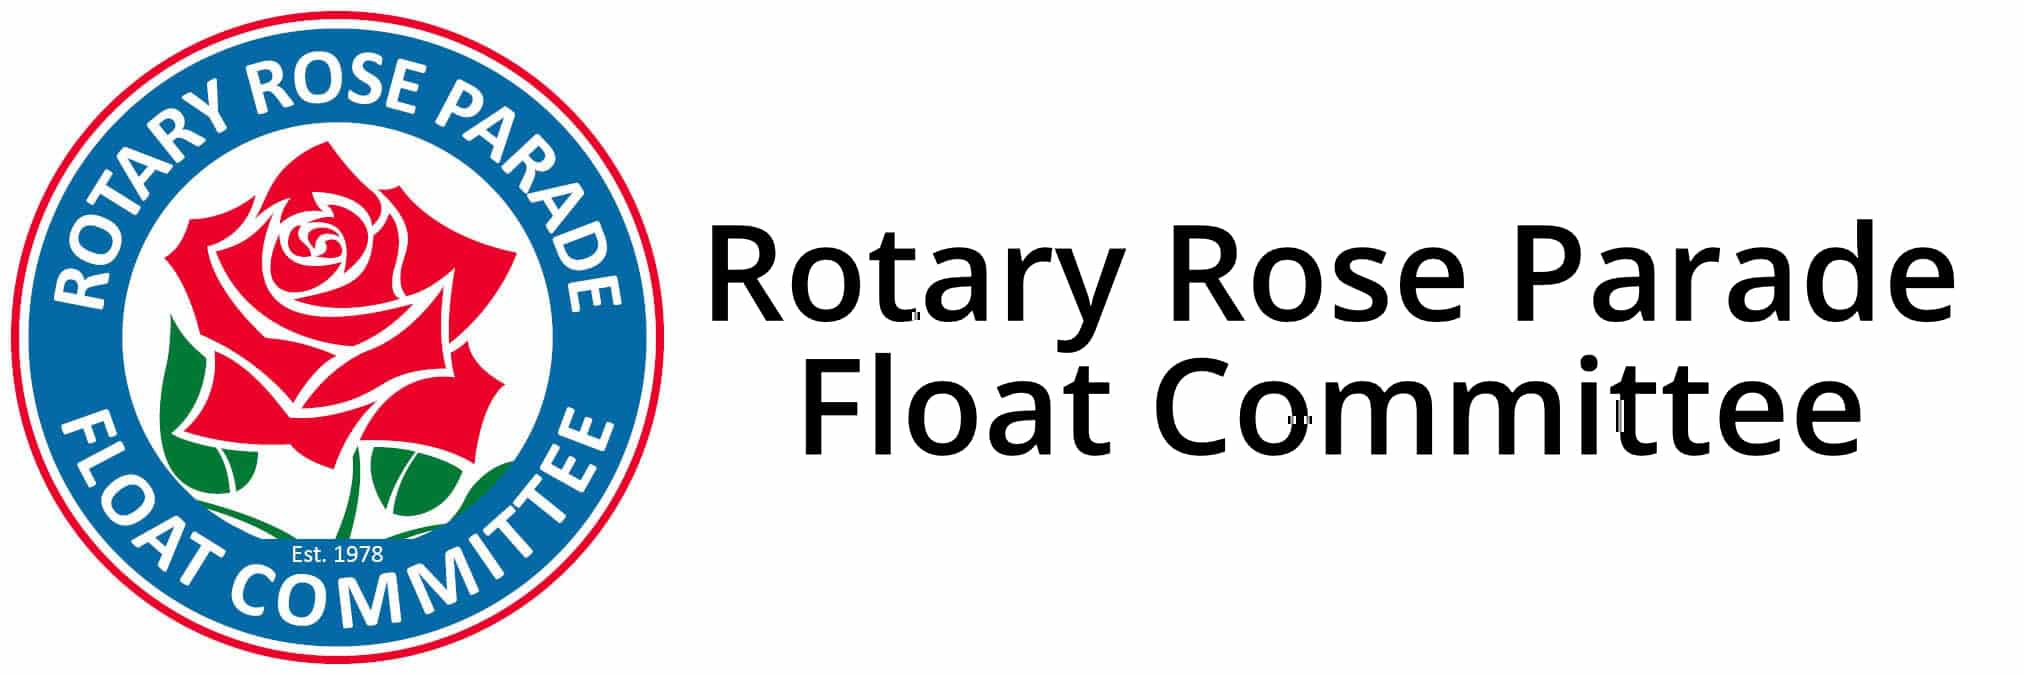 Rotary Rose Parade Float Committee